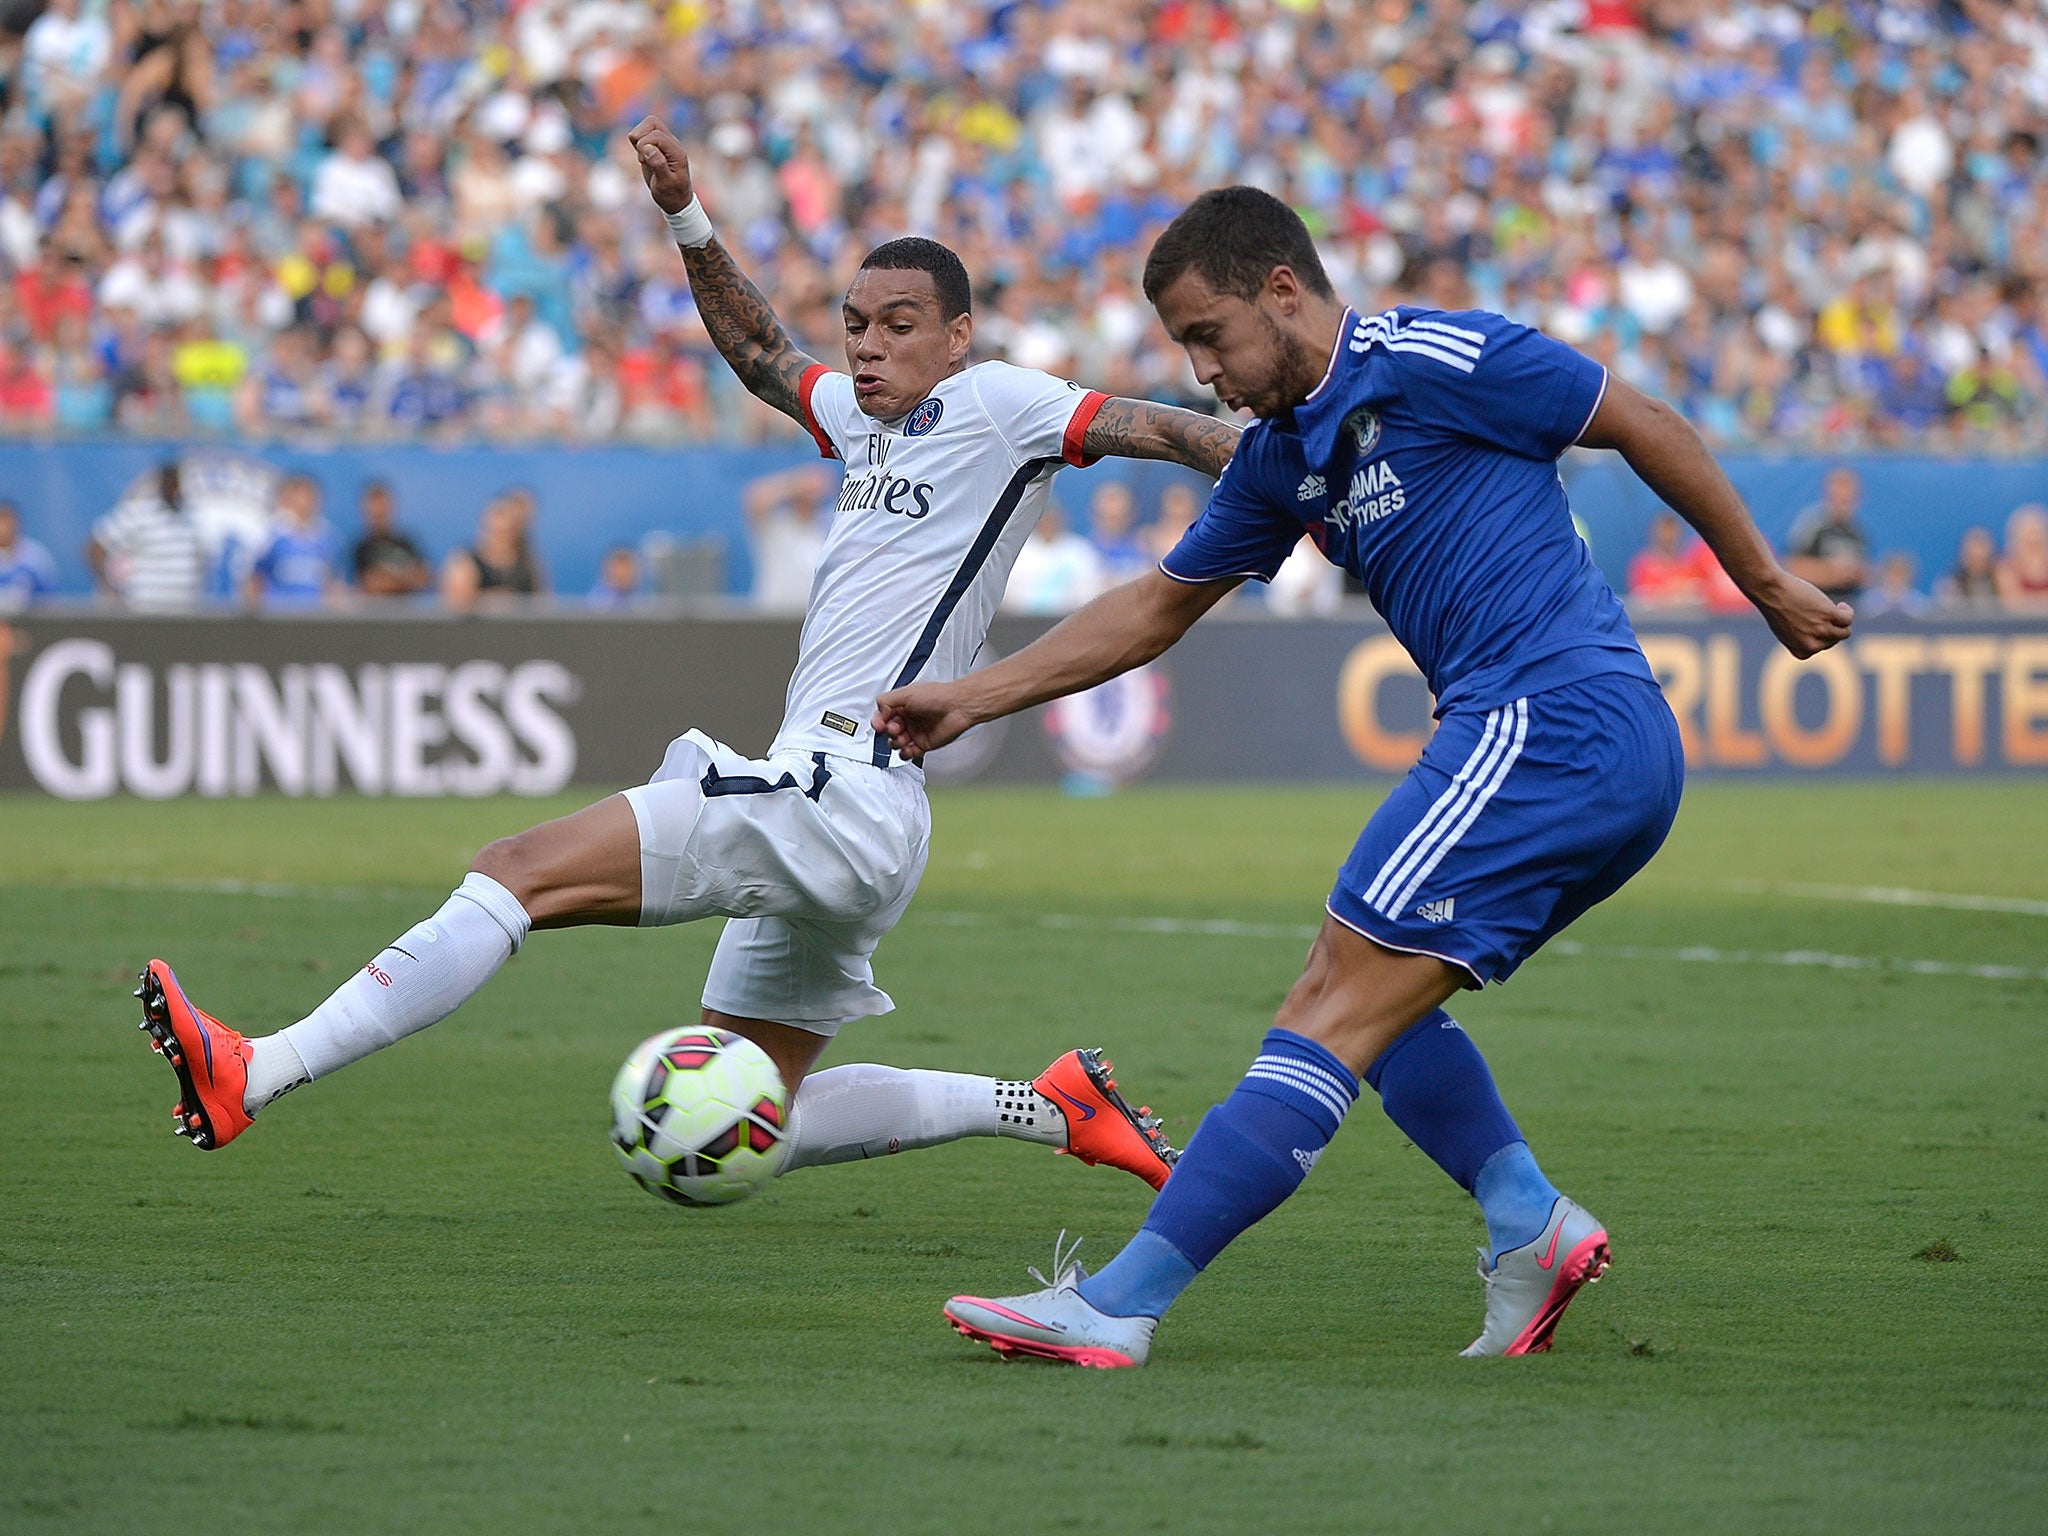 Eden Hazard in action for Chelsea during their friendly win against PSG in North Carolina. Chelsea won 6-5 on penalties after a Victor Moses goal had earned a 1-1 draw